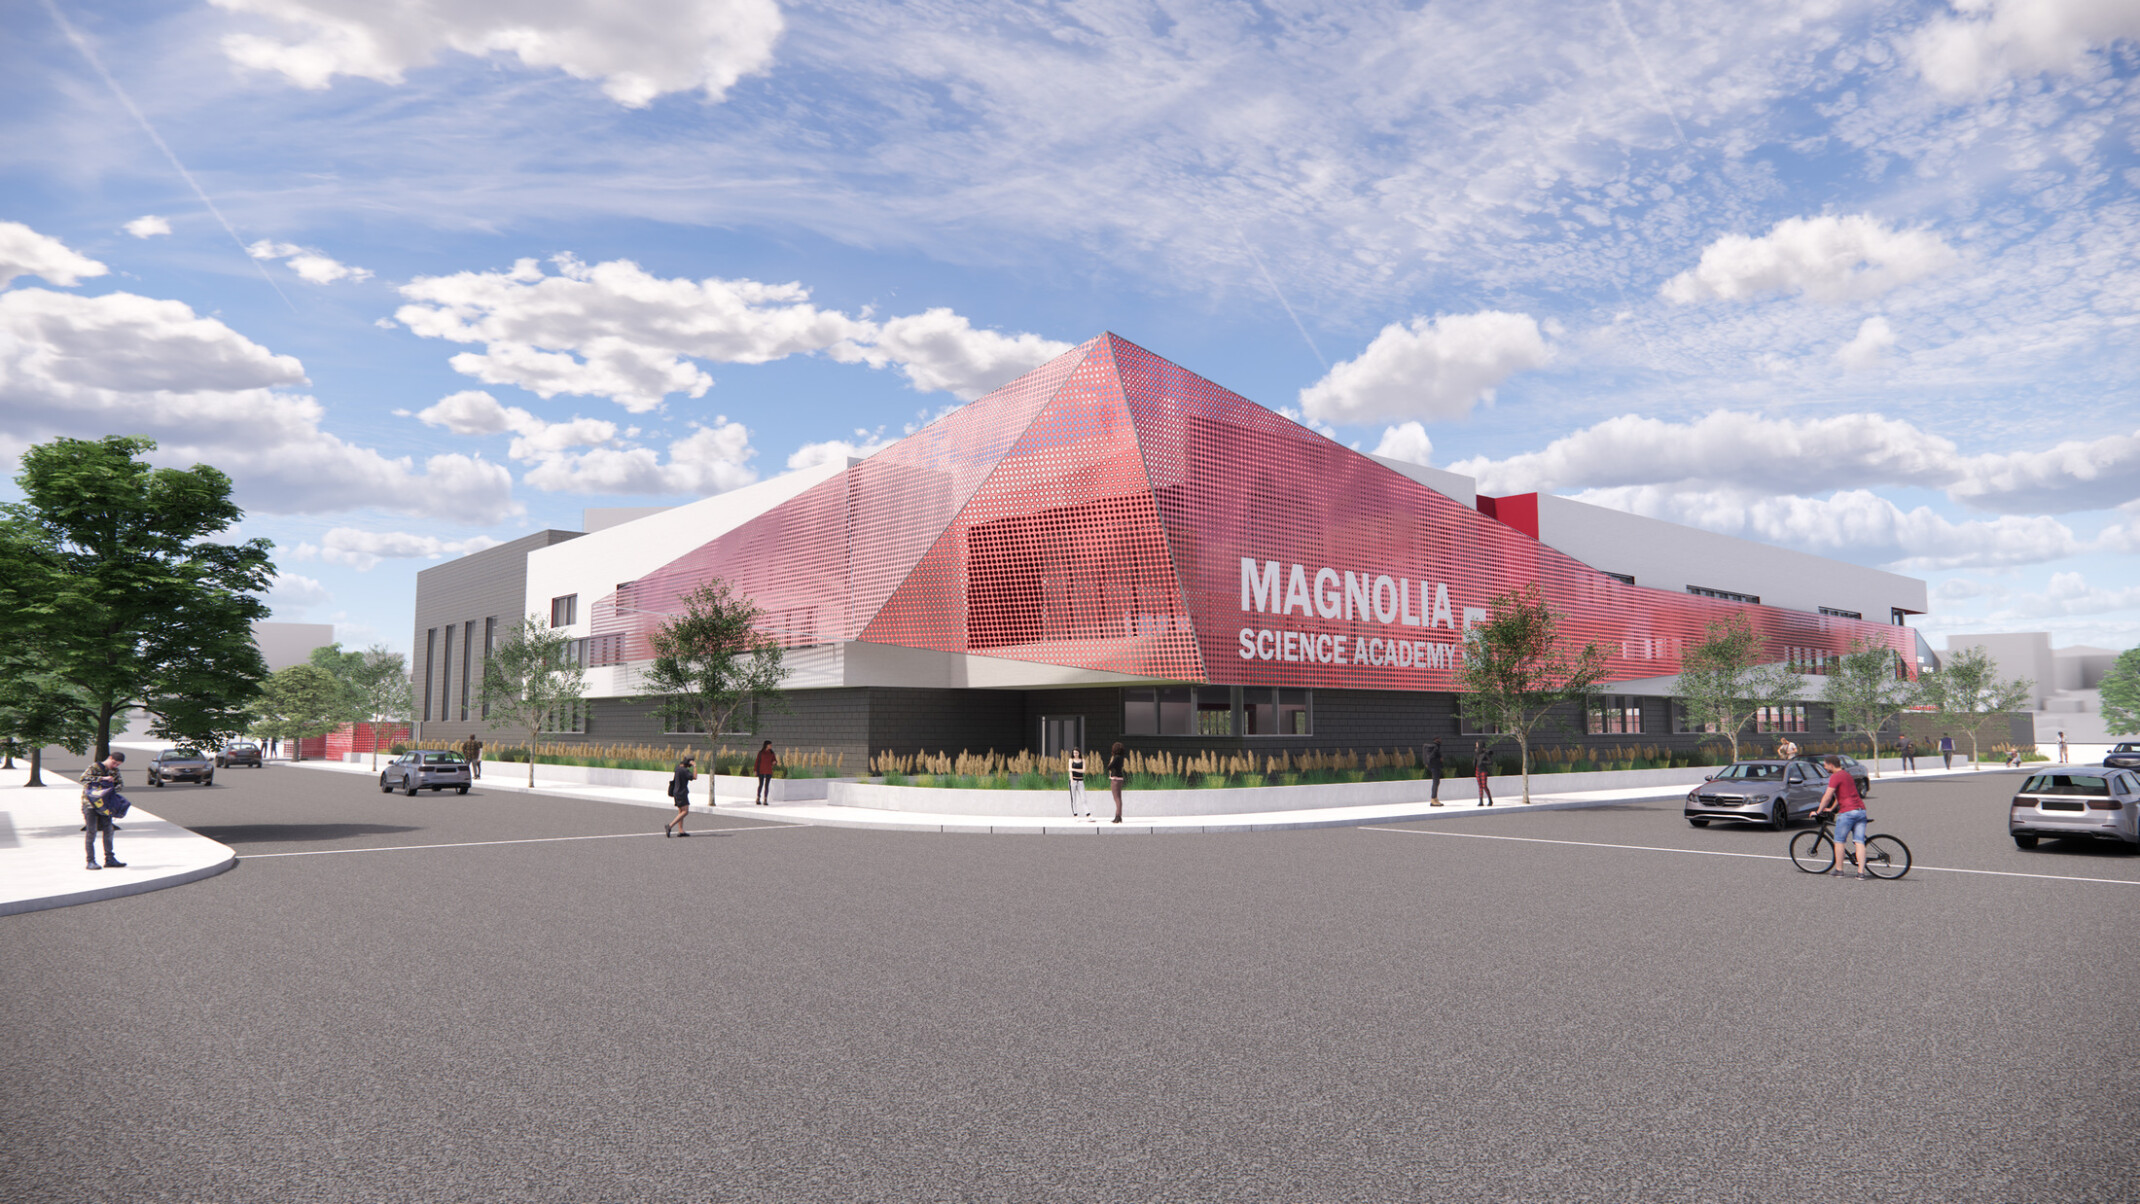 Rendering of Magnolia Science Academy 5 showing a building with modern red awning